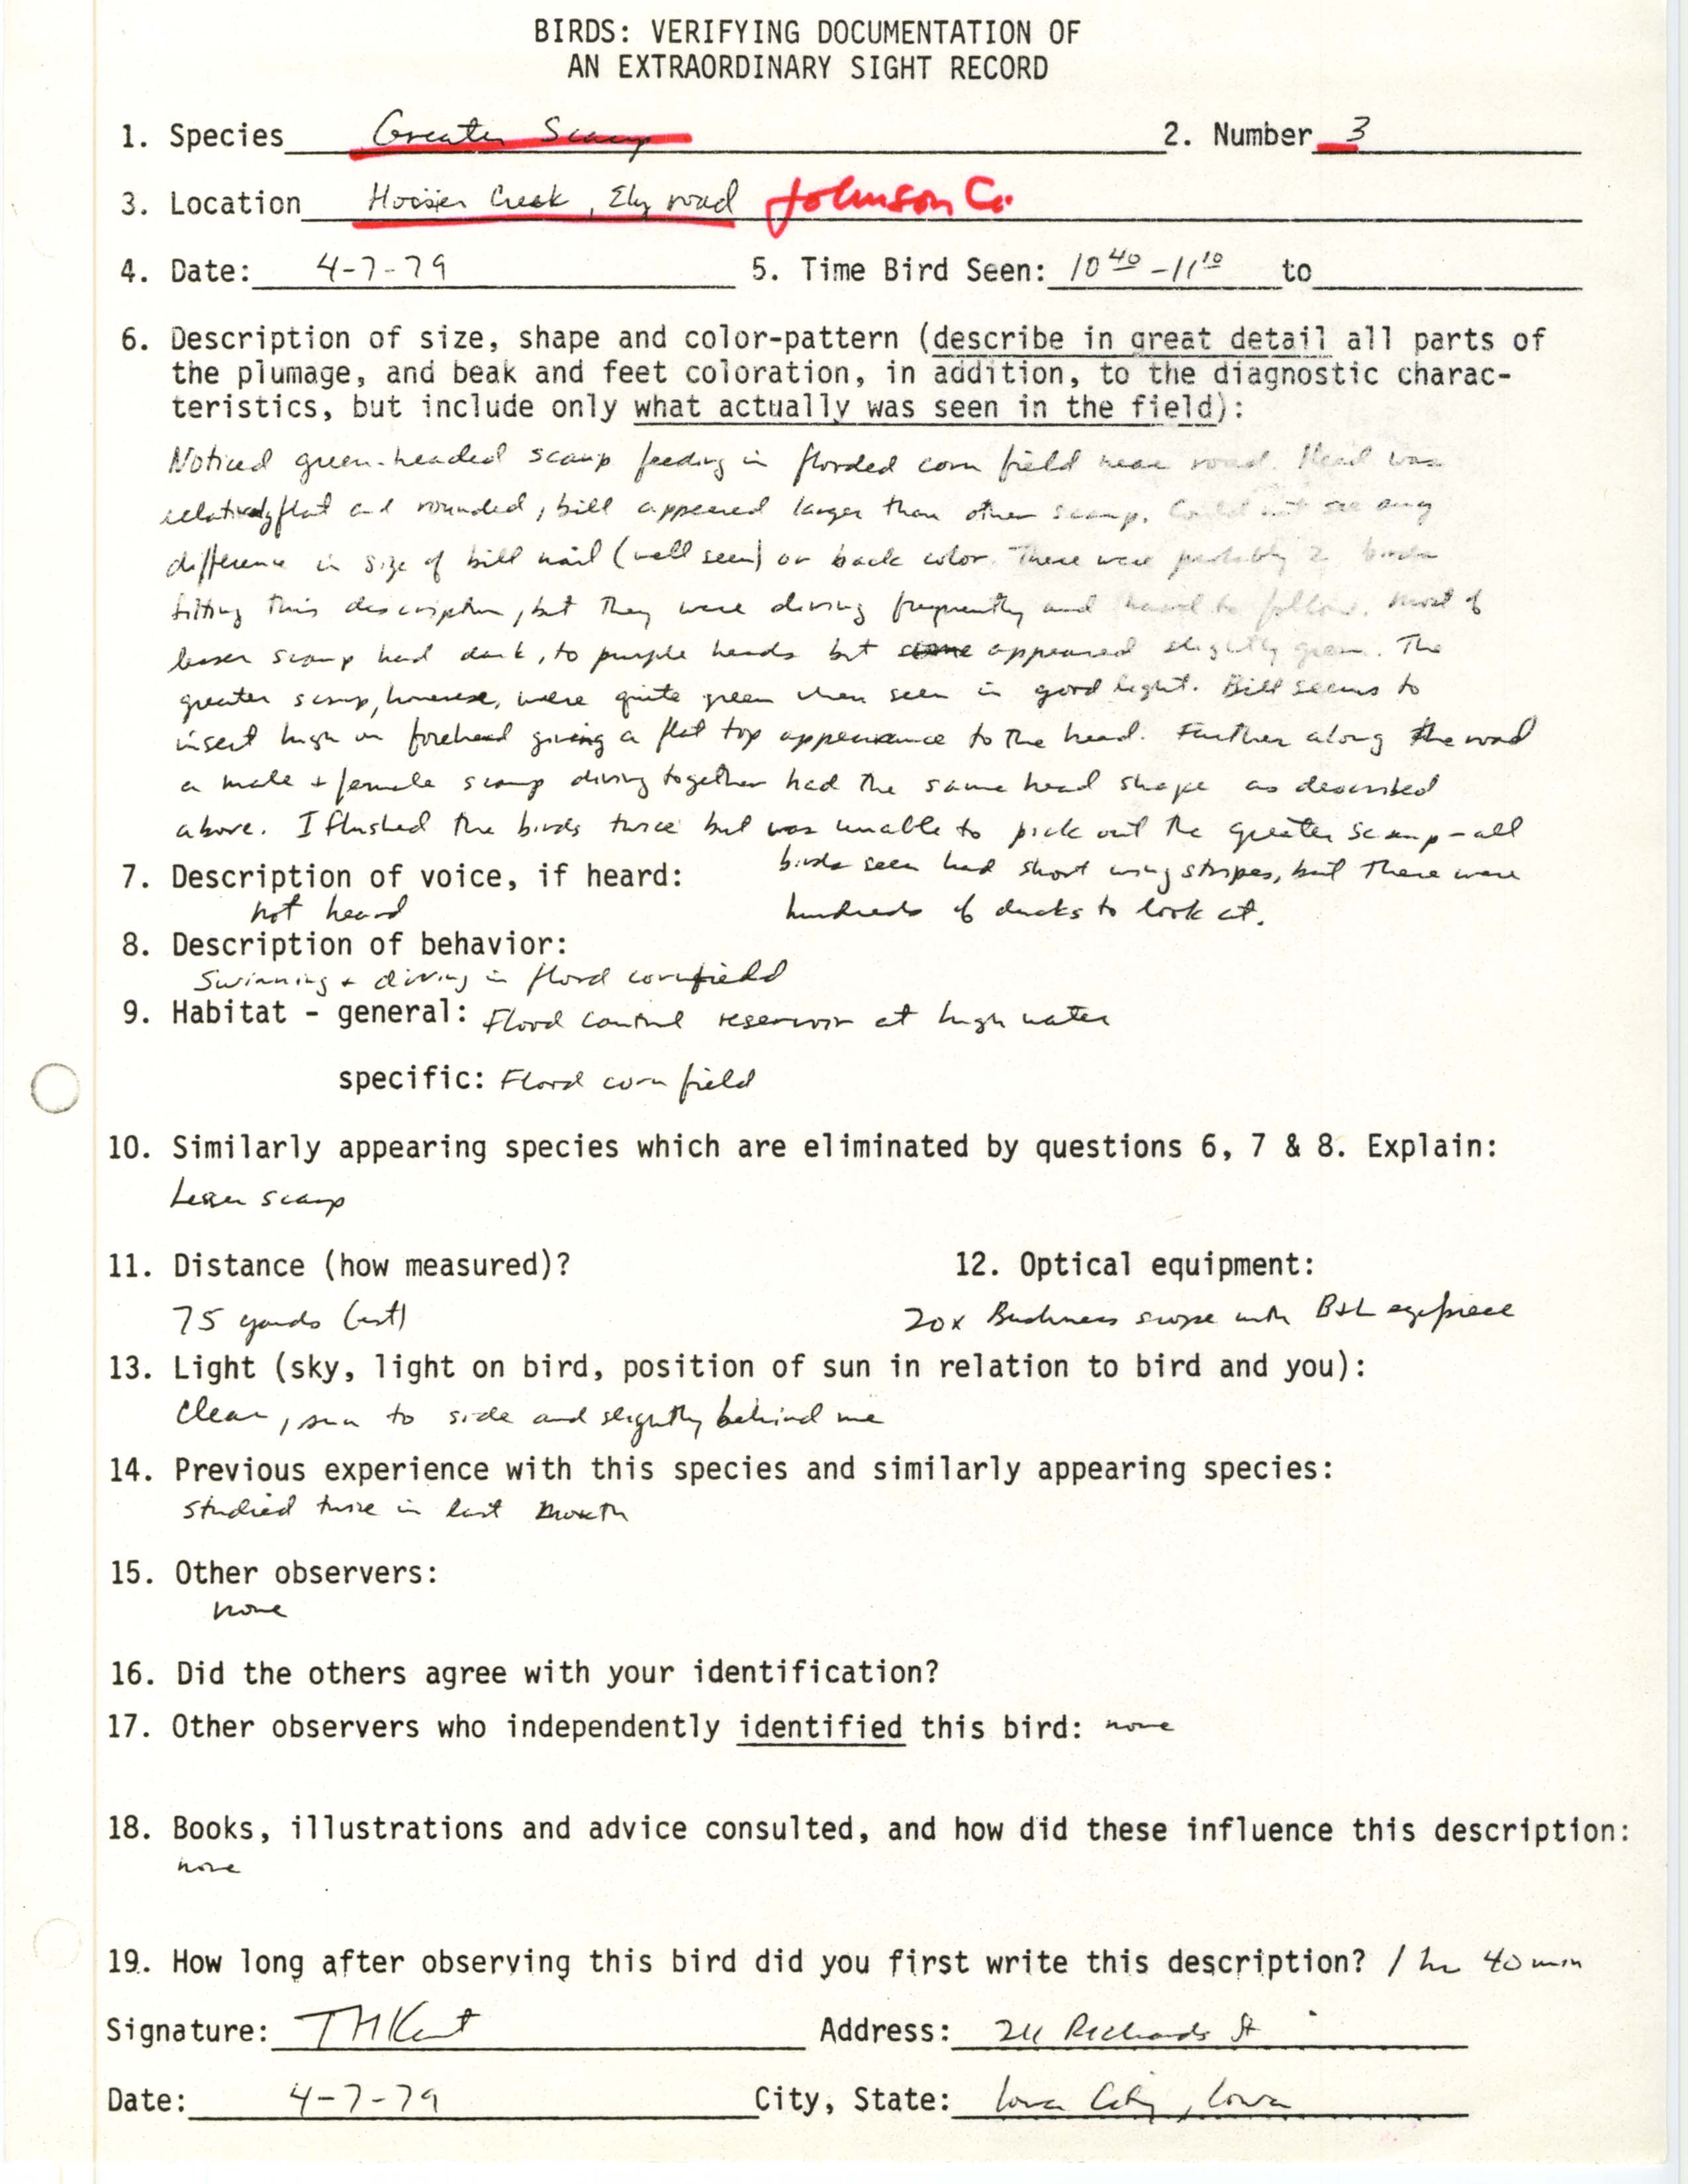 Rare bird documentation form for Greater Scaup at Hoosier Creek in 1979